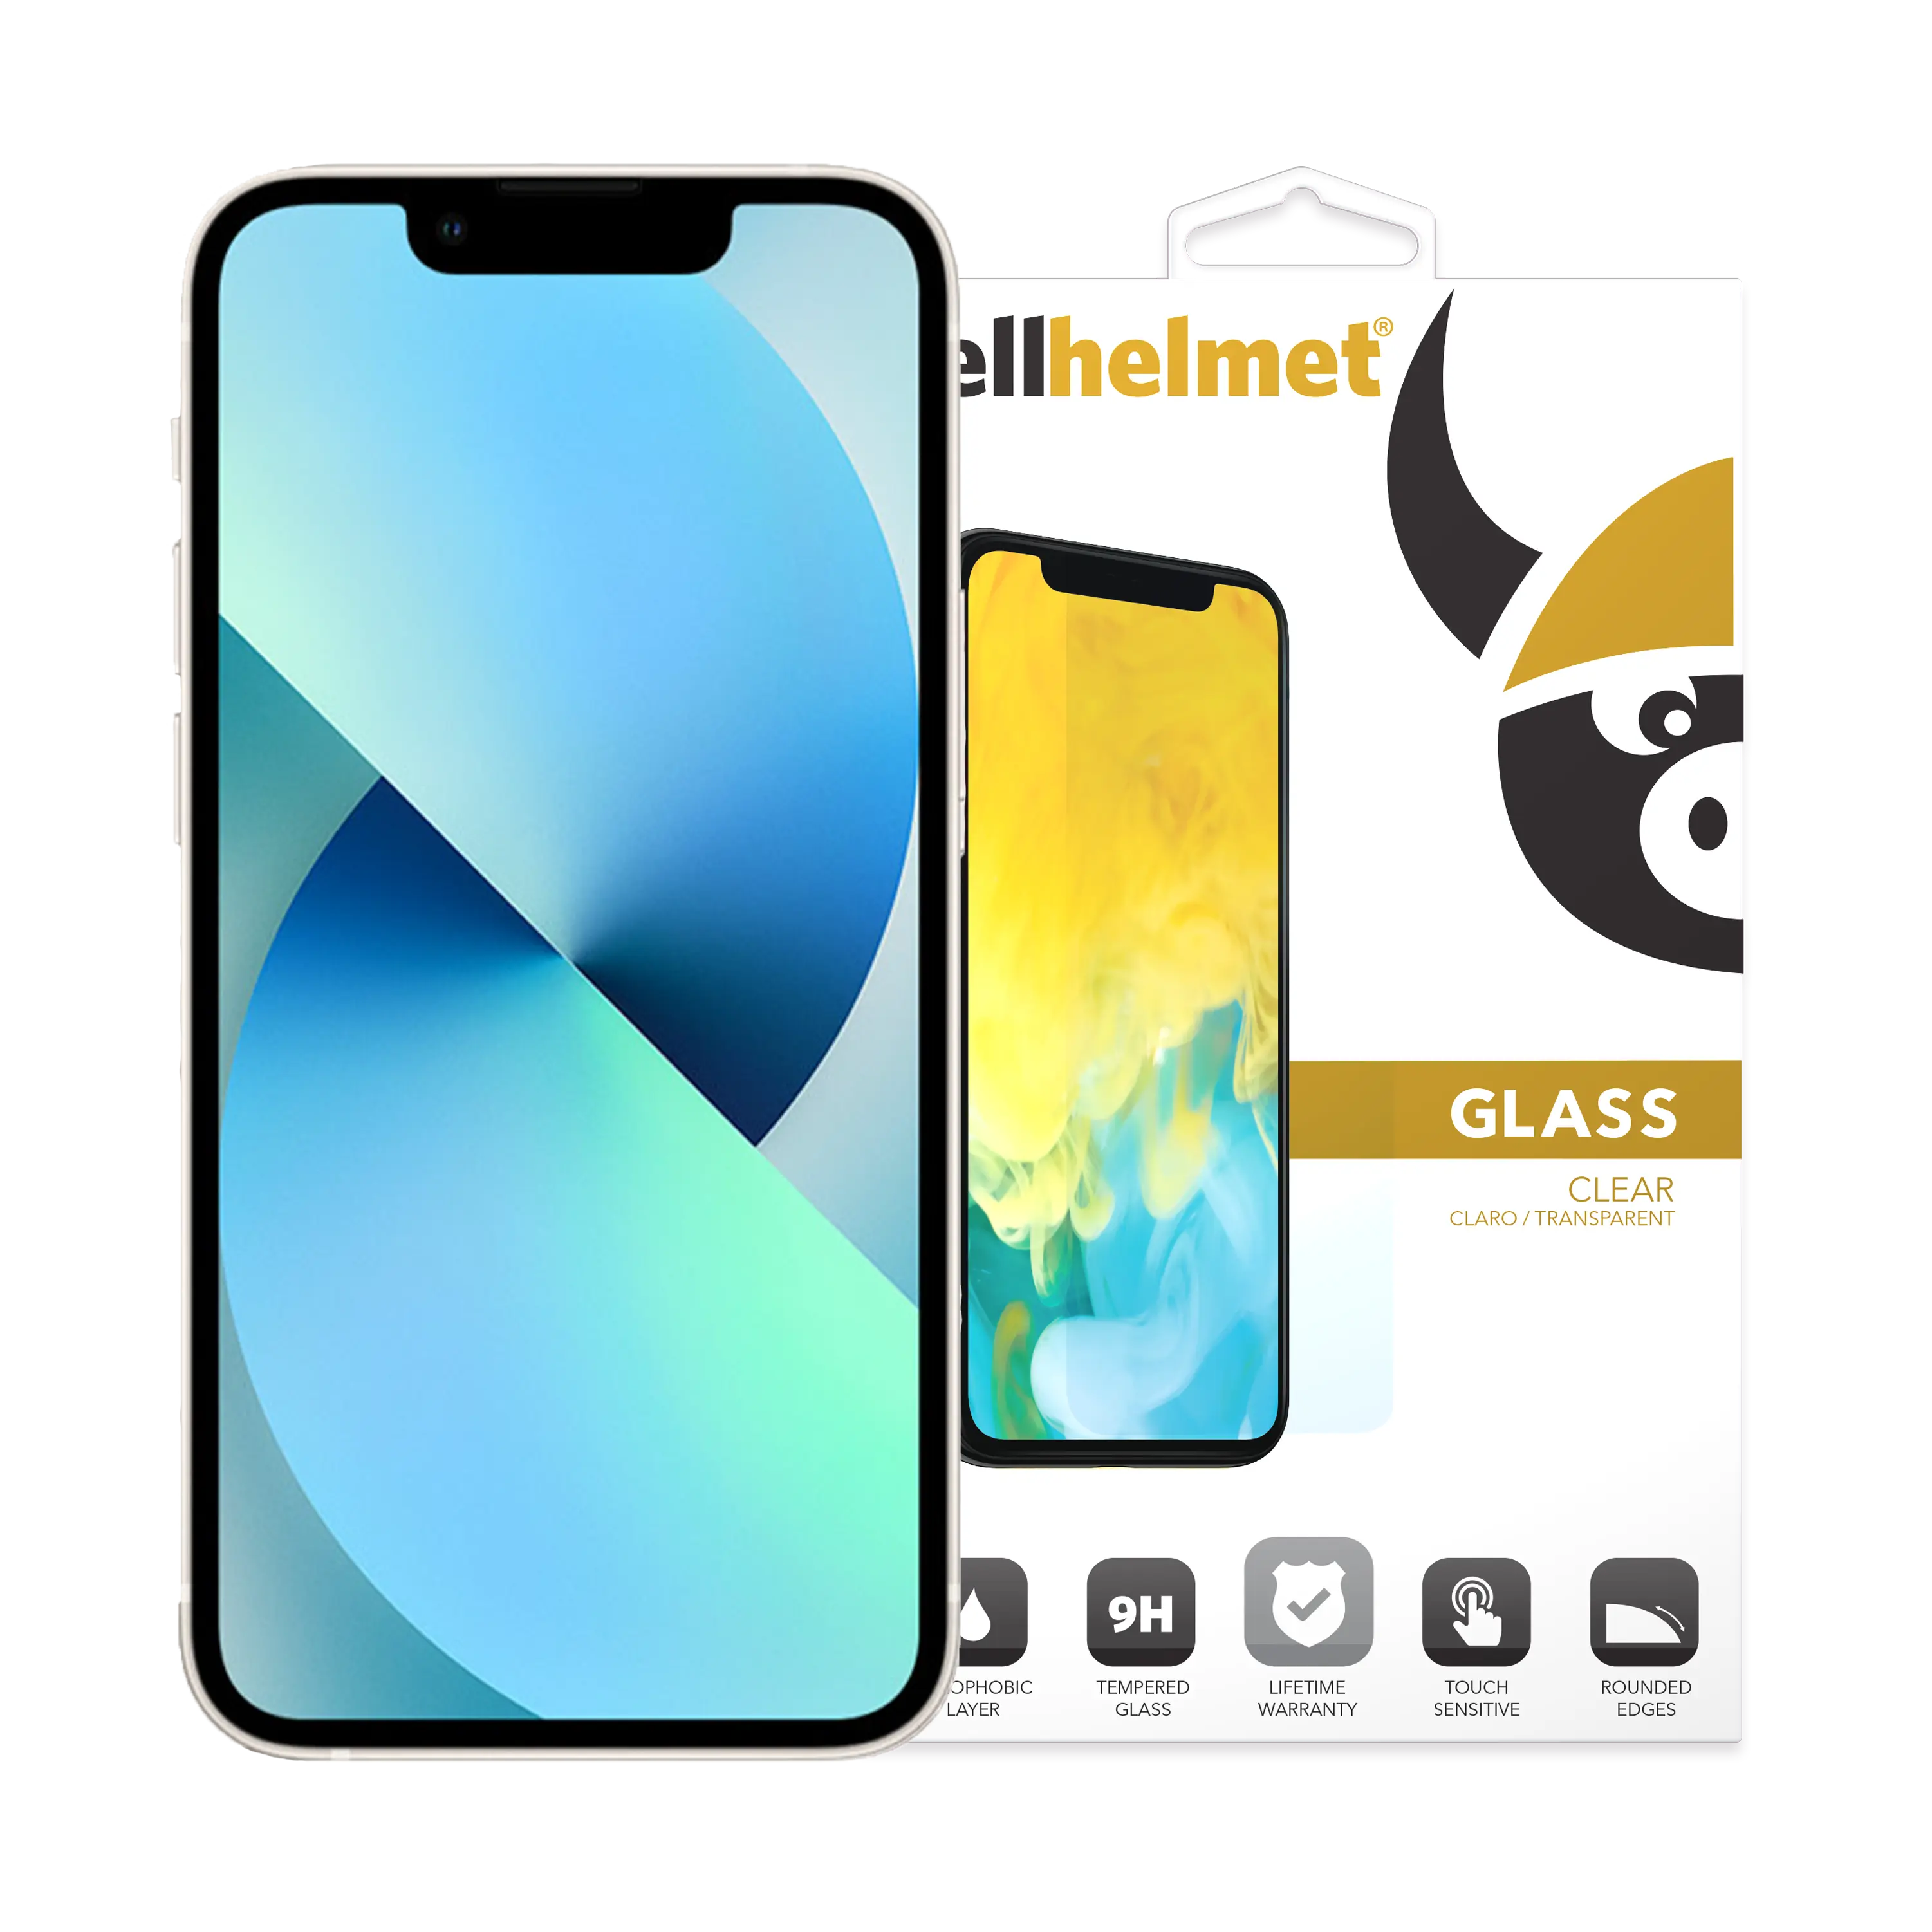 cellhelmet Tempered Glass for iPhone 13 Pro